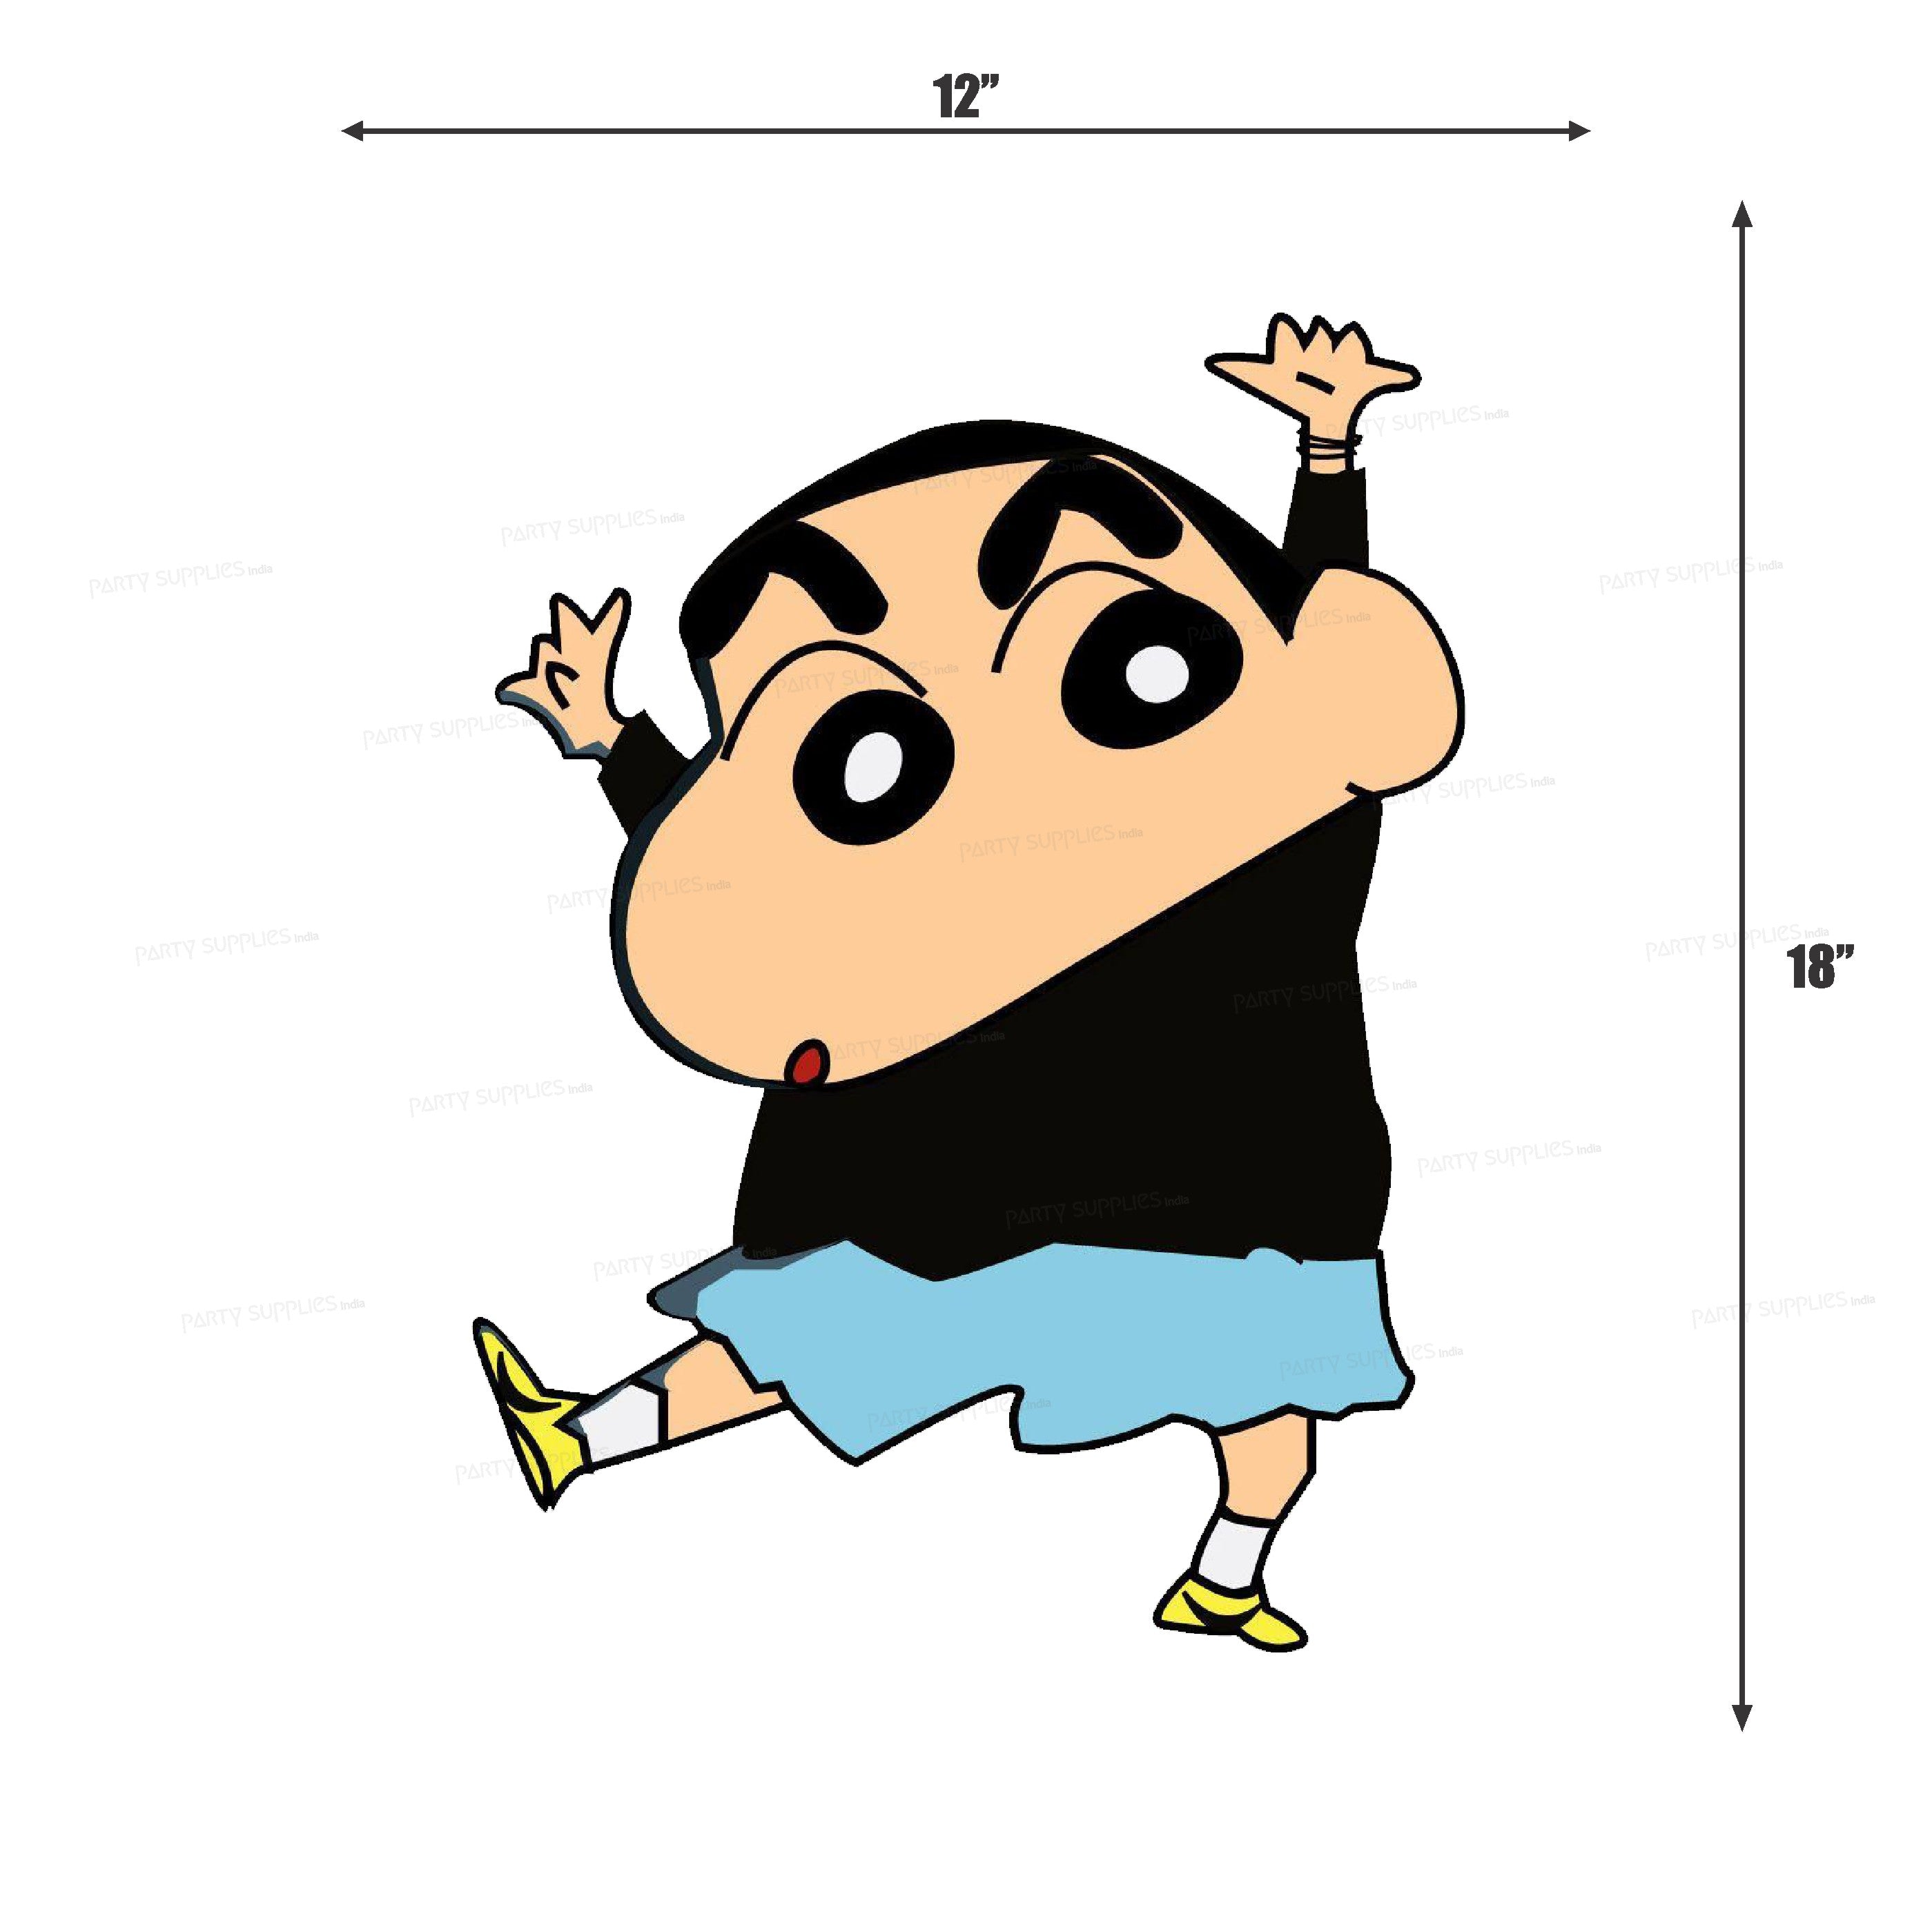 Shinchan Drawing || How to Draw Shinchan and Friends Step by Step - YouTube